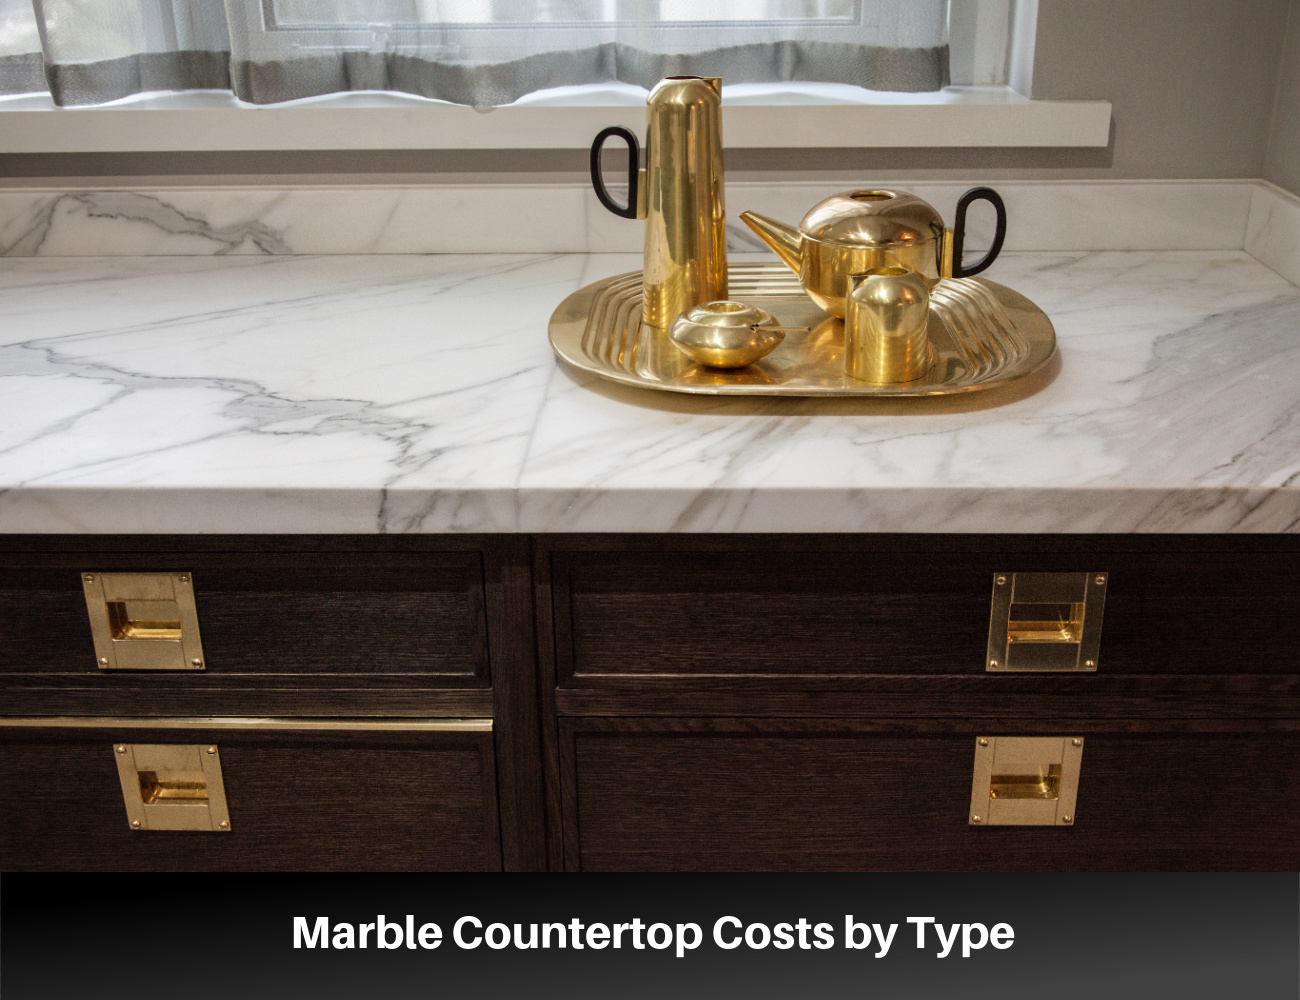 Marble countertops cost